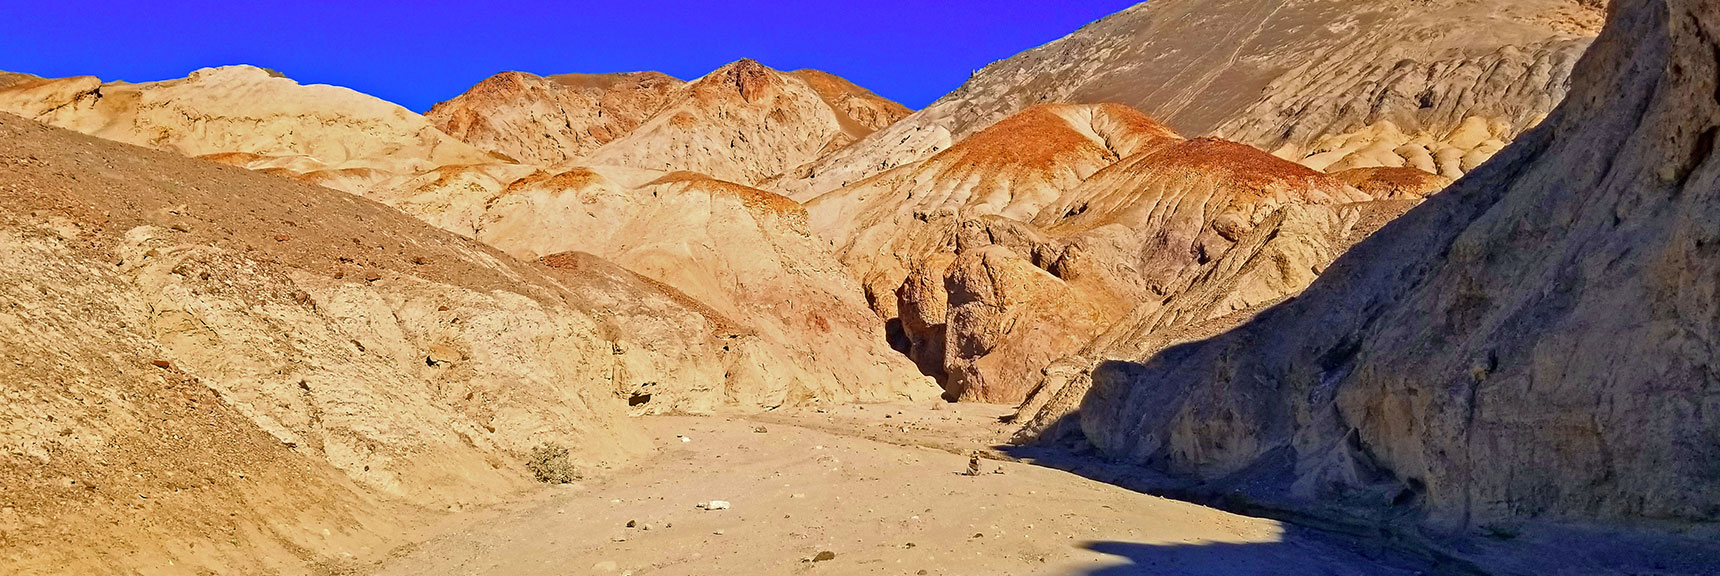 This is a Canyon Scene from the Movie Star Wars, or a Close, Similar Canyon | Artists Drive Hidden Canyon Hikes | Death Valley National Park, California